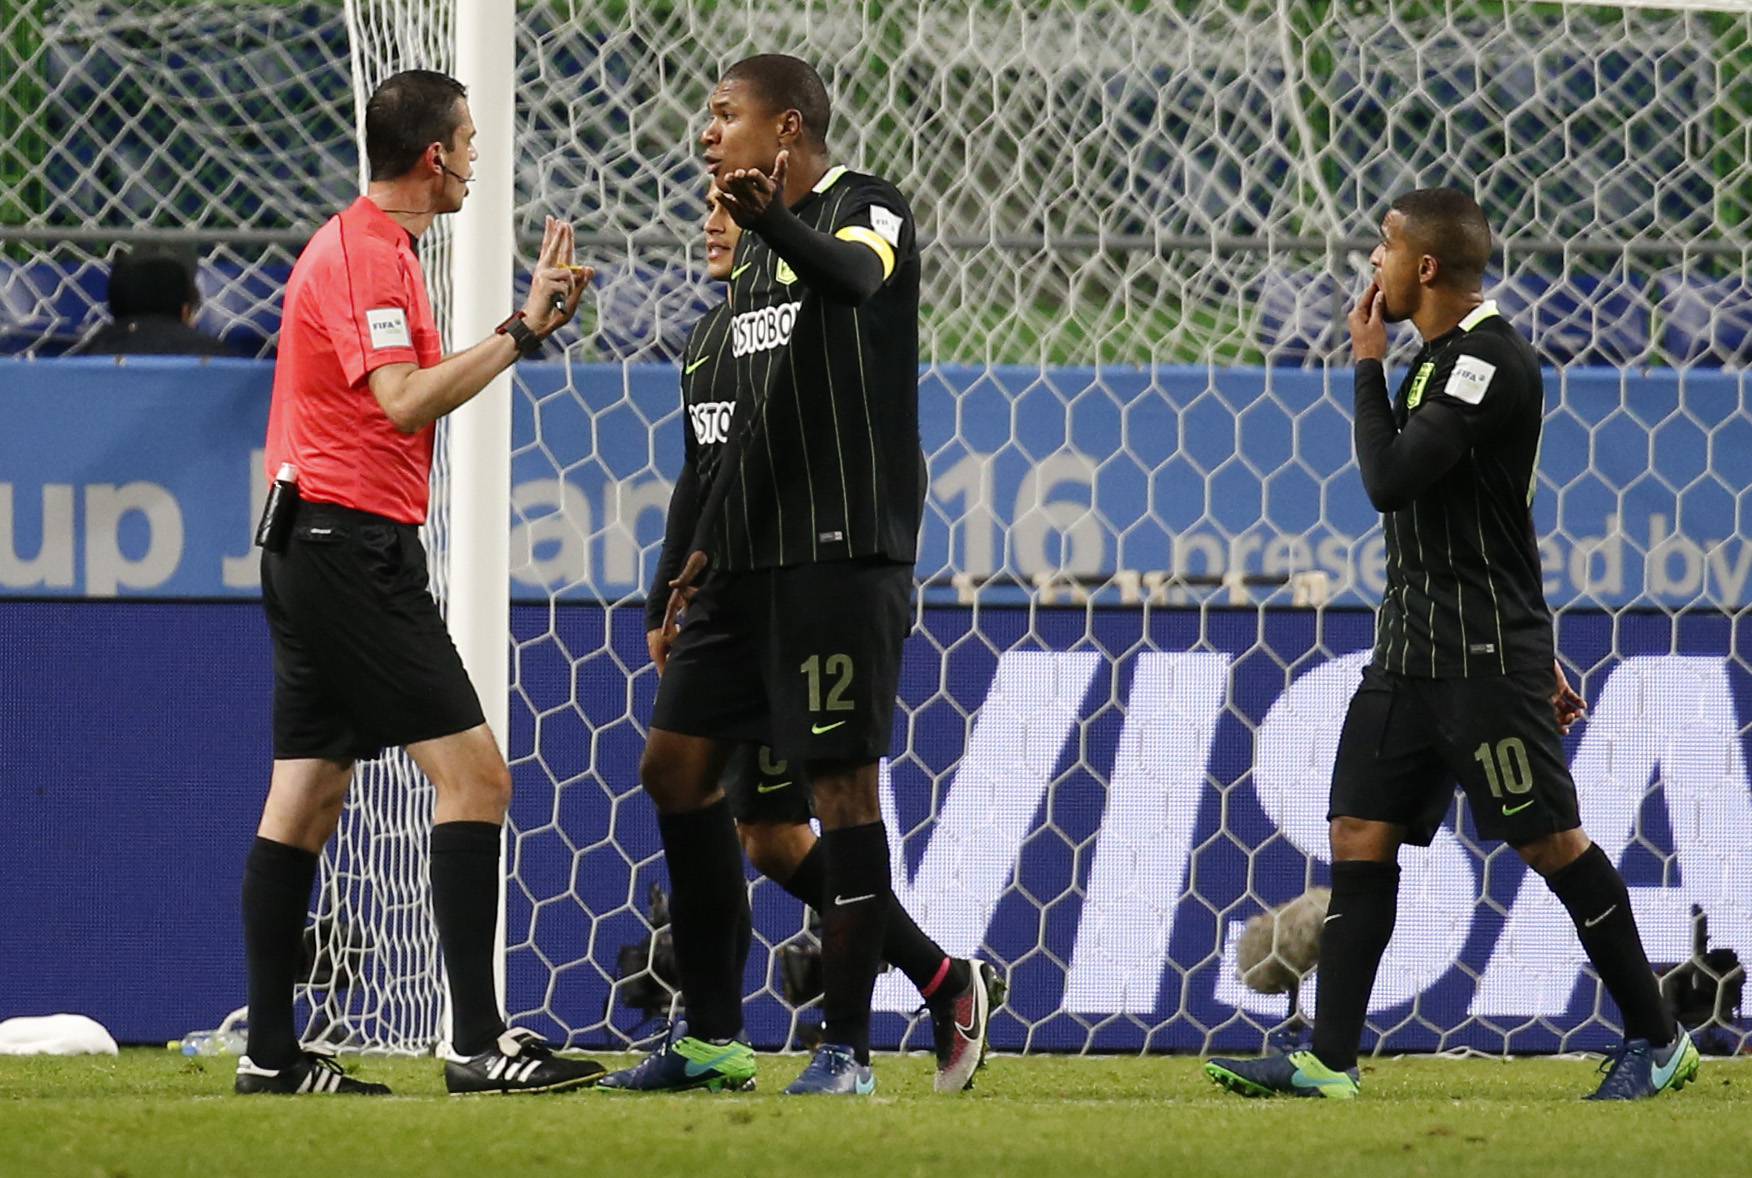 Atletico Nacional's Alexis Henriquez and teammates remonstrate with referee Viktor Kassai after he awarded a penalty to Kashima Antlers